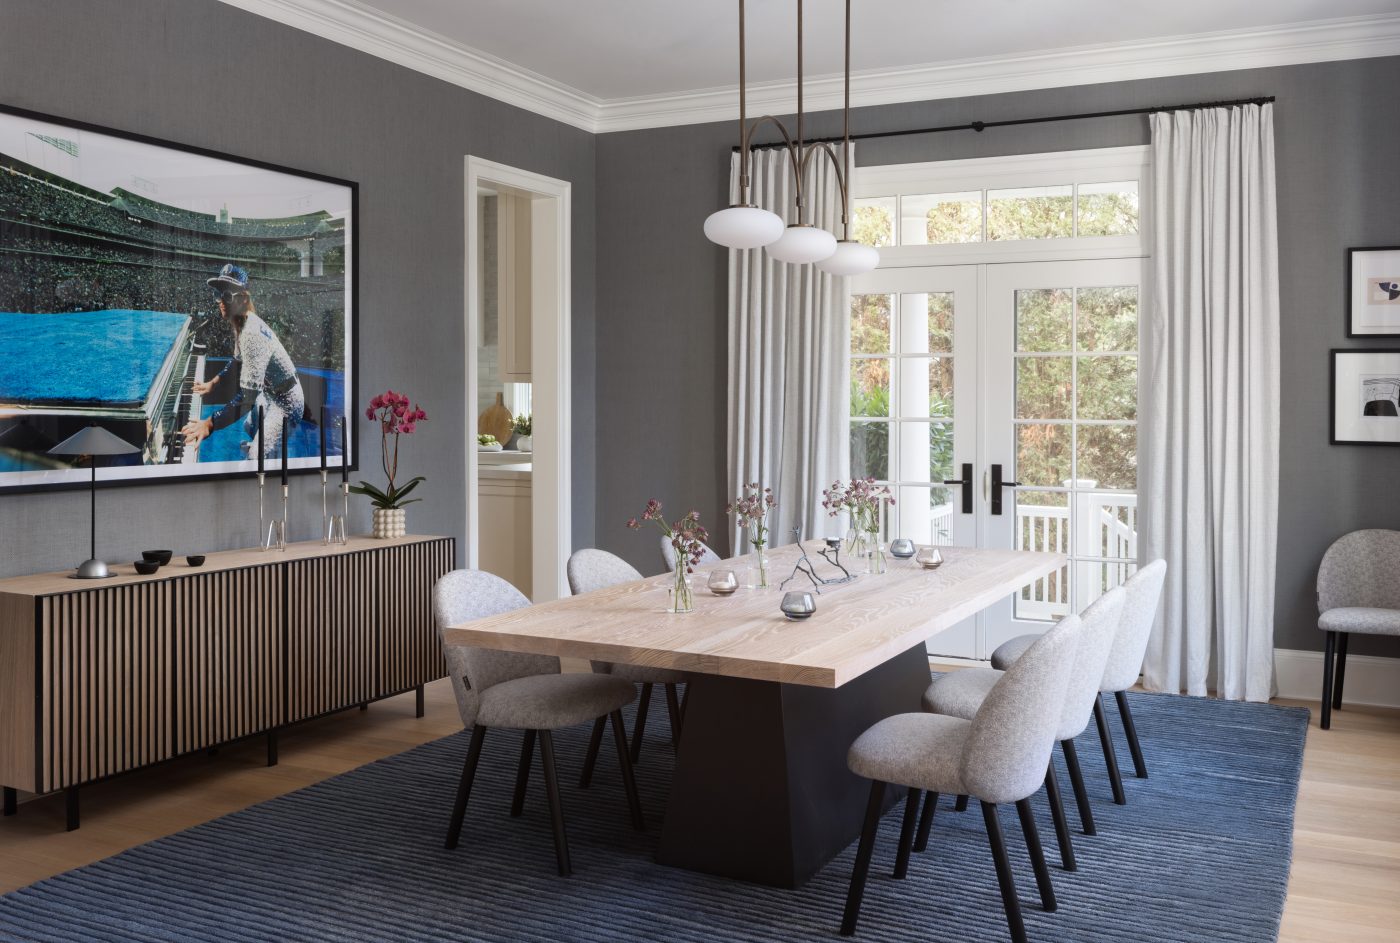 The dining room of a home designed by AK Studio in Bethesda, Maryland